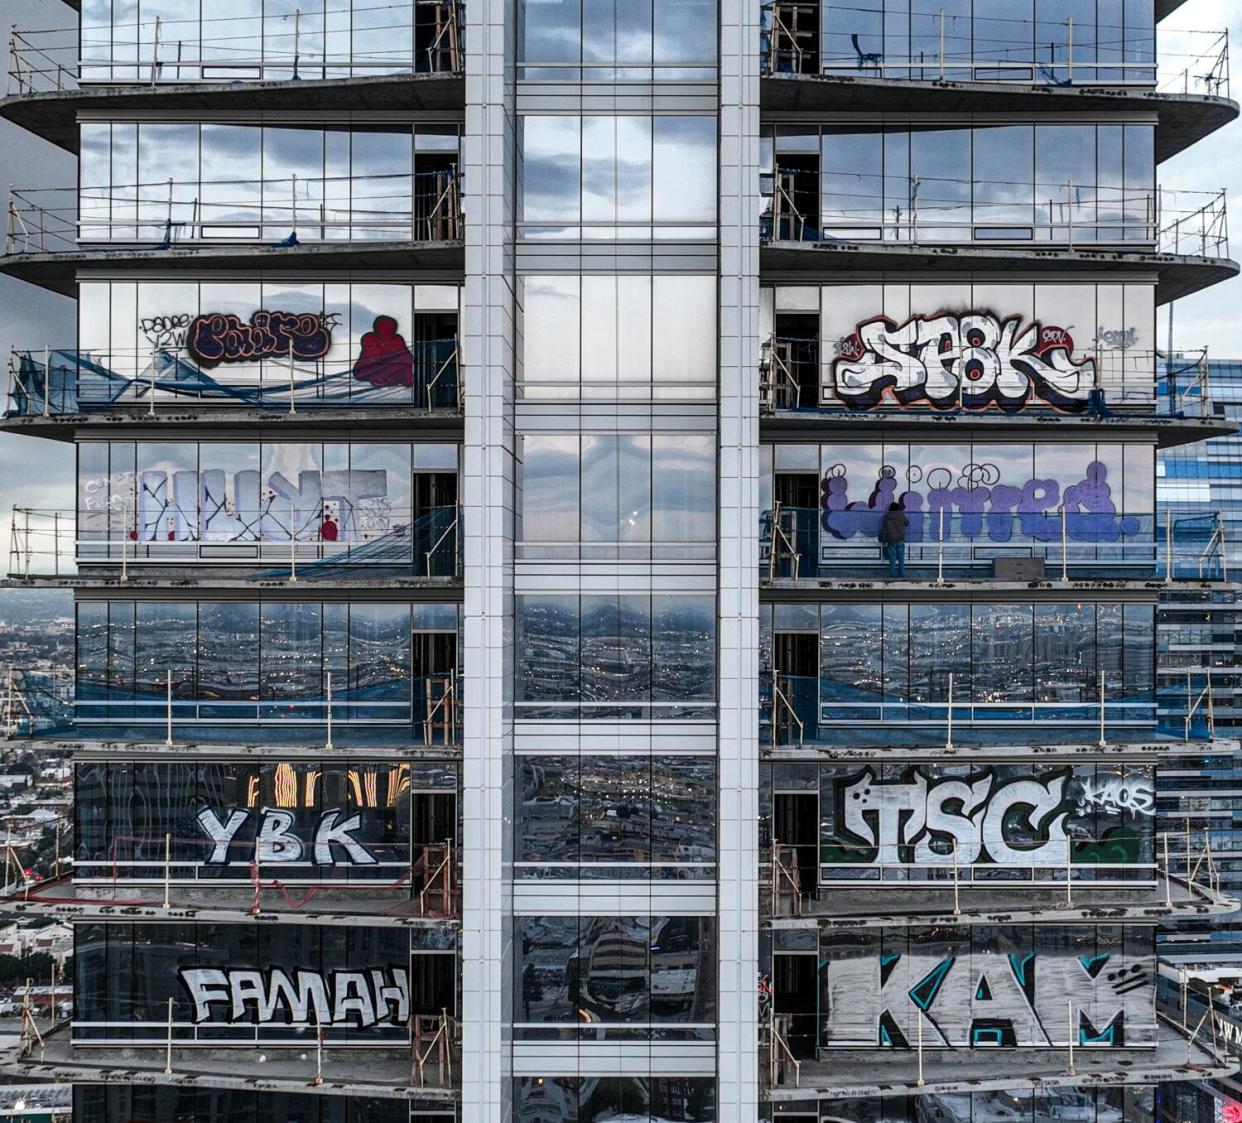 Taggers are seen on upper floors of an unfinished building.